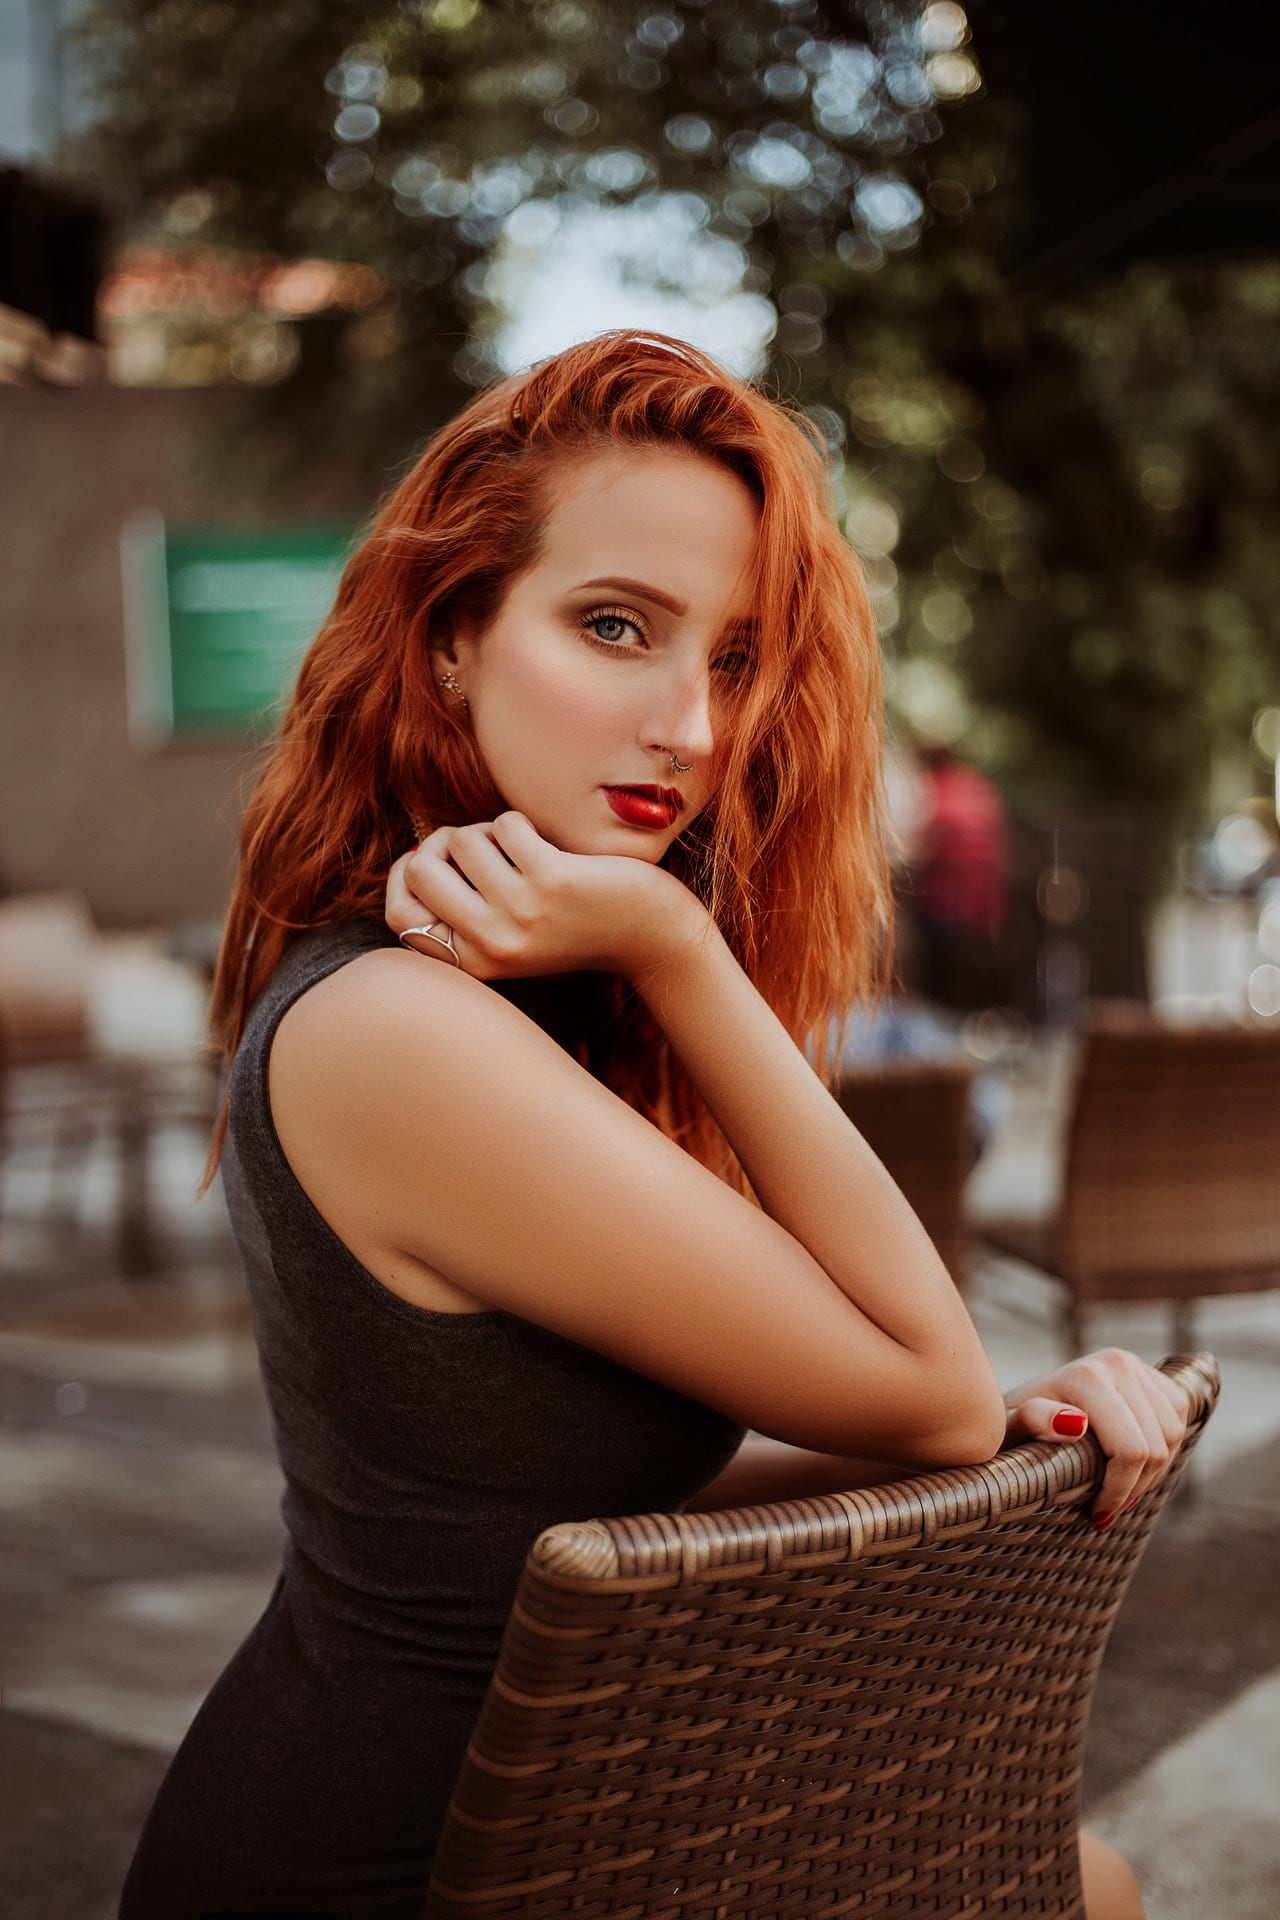 10 interesting facts about redheads